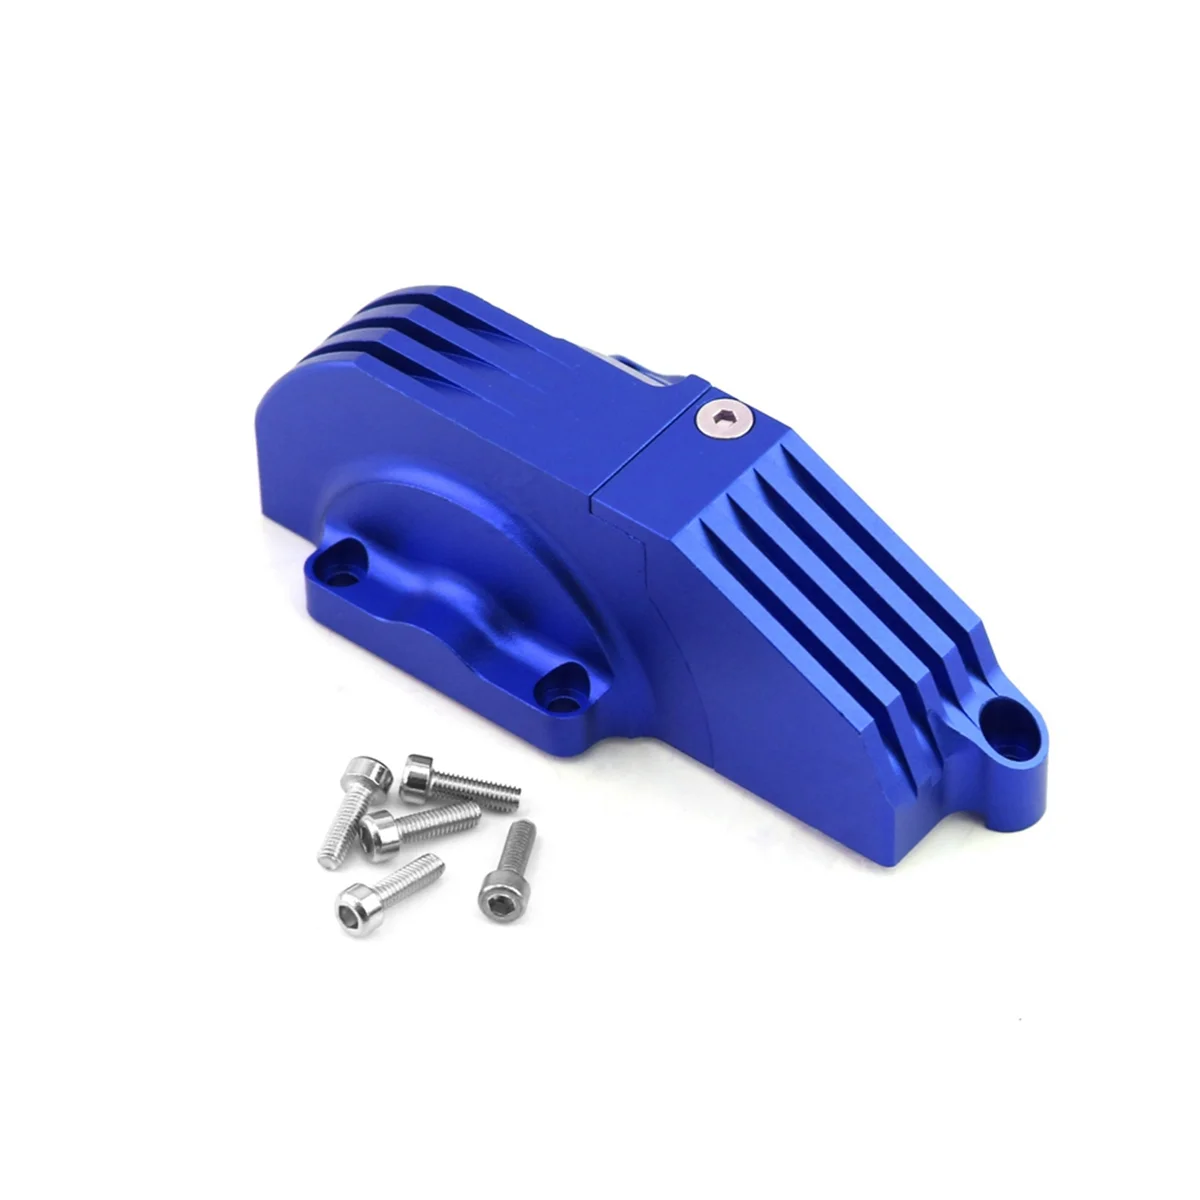 

For TRAXXAS 1/10 MAXX 89086-4 -89076-4 Aluminum Alloy Main Tooth Protection Cover - Pc 8987,Blue